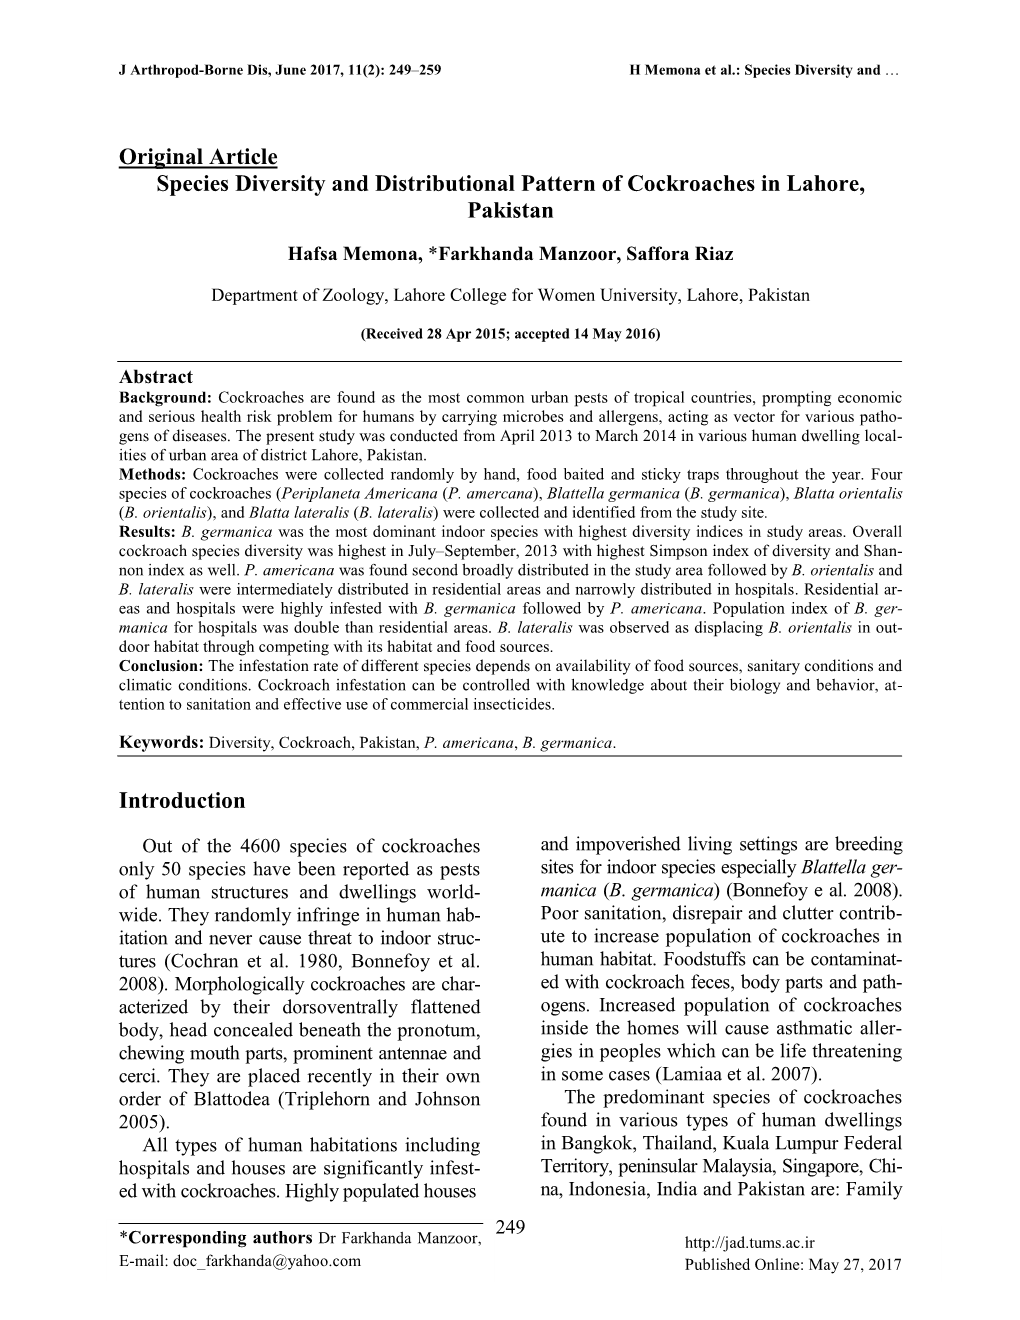 Original Article Species Diversity and Distributional Pattern of Cockroaches in Lahore, Pakistan Introduction